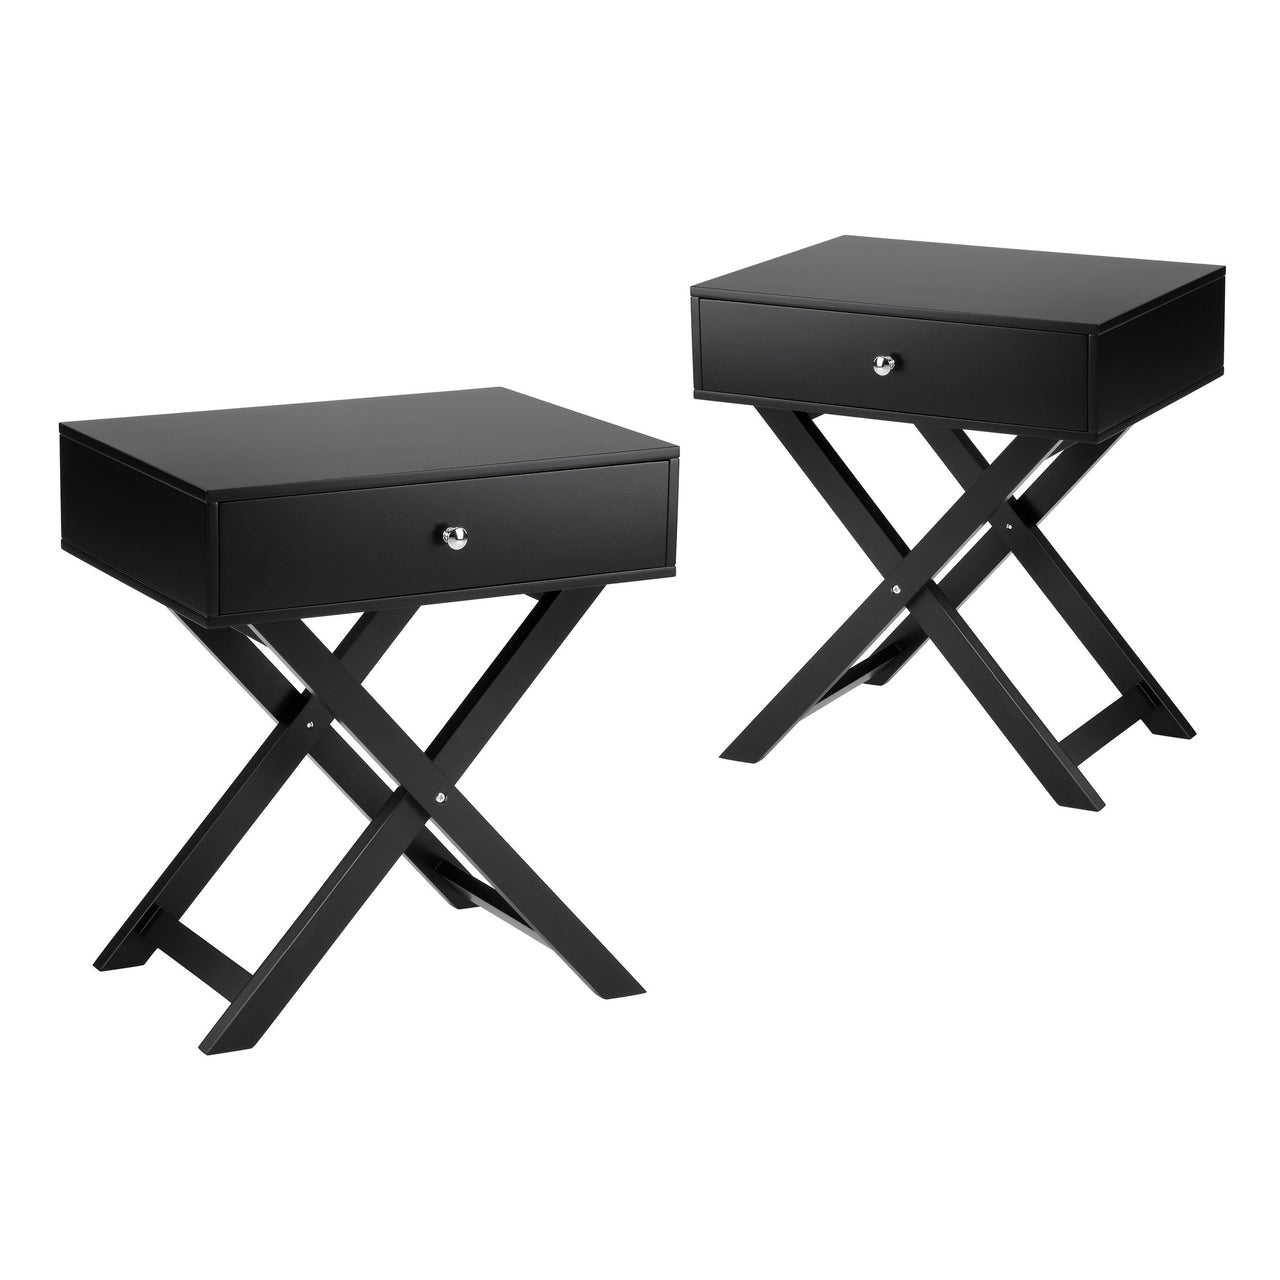 Twin Lakes Bedside Tables (Set of 2)